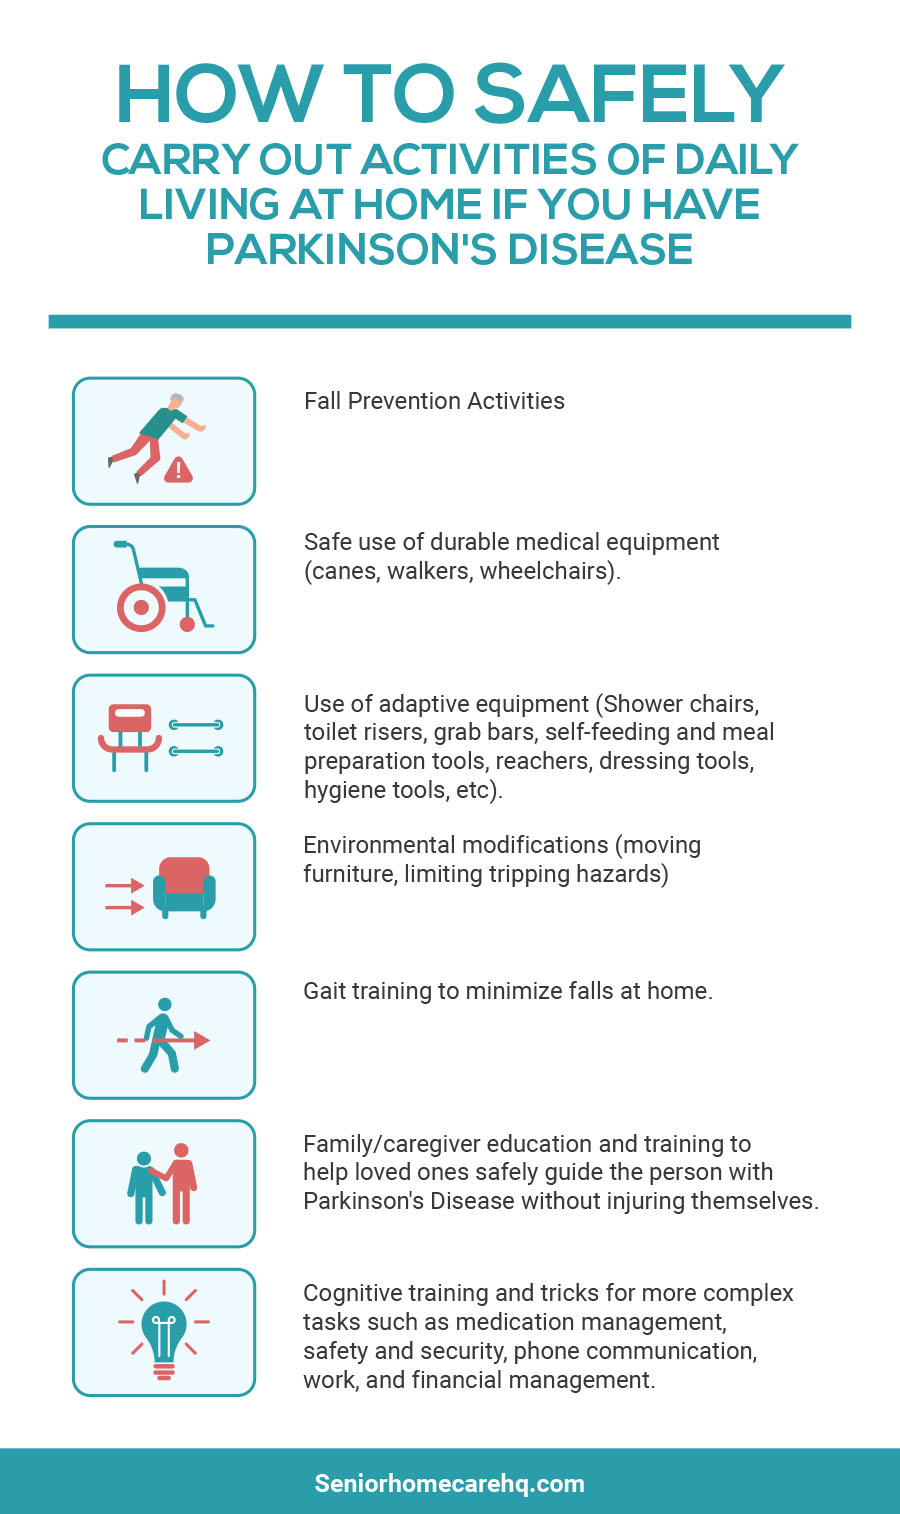 How to safely carry out activities of daily living if you have parkinson's disease